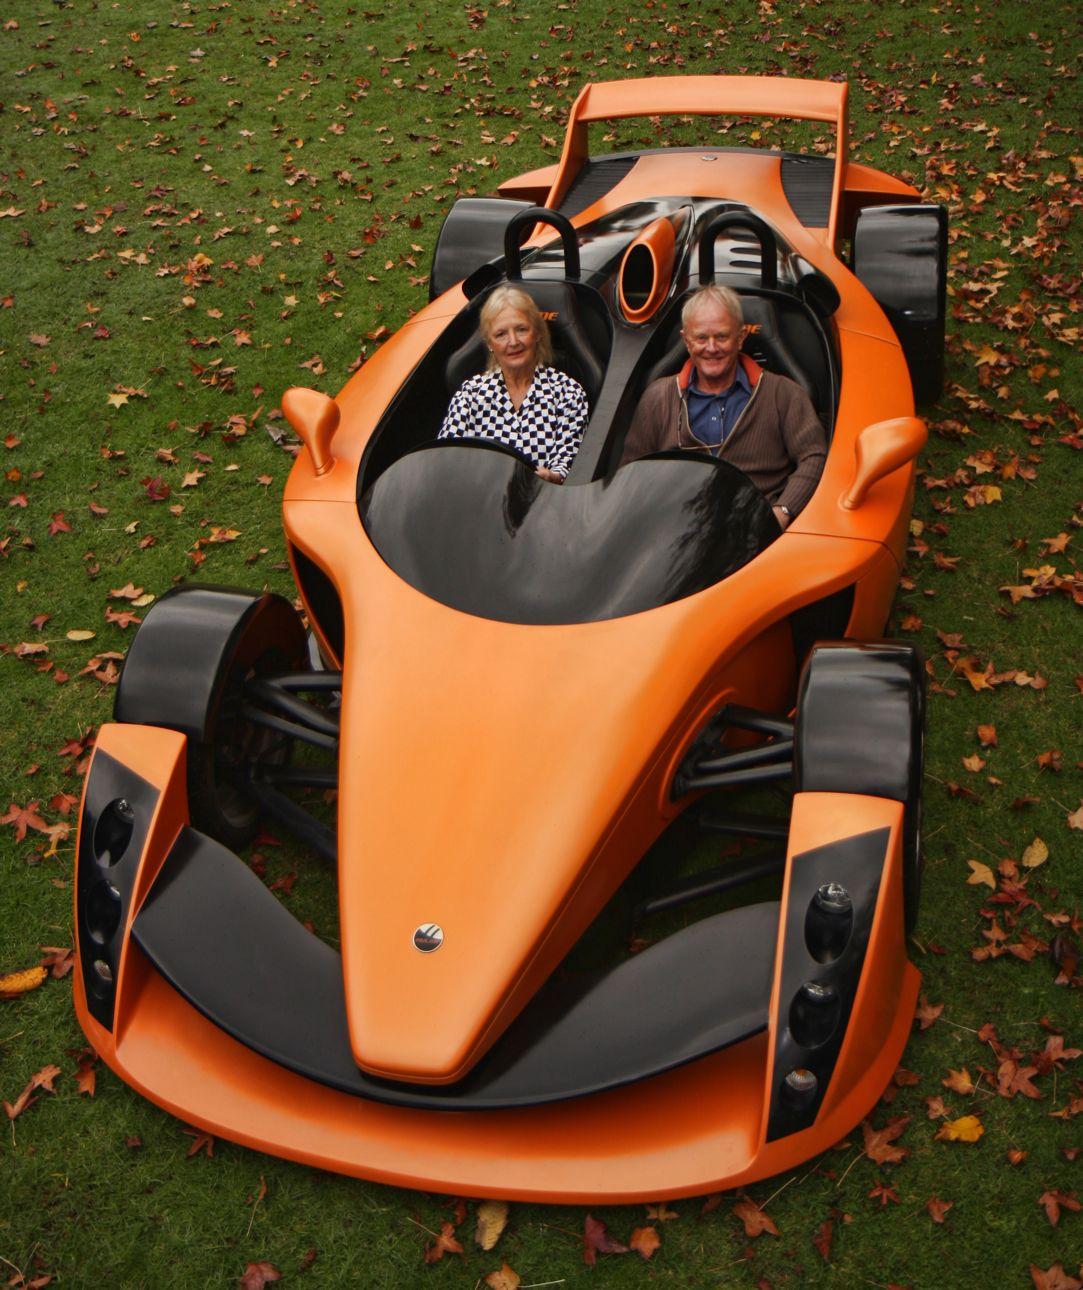 Hulme CanAm supercar from New Zealand ready to order